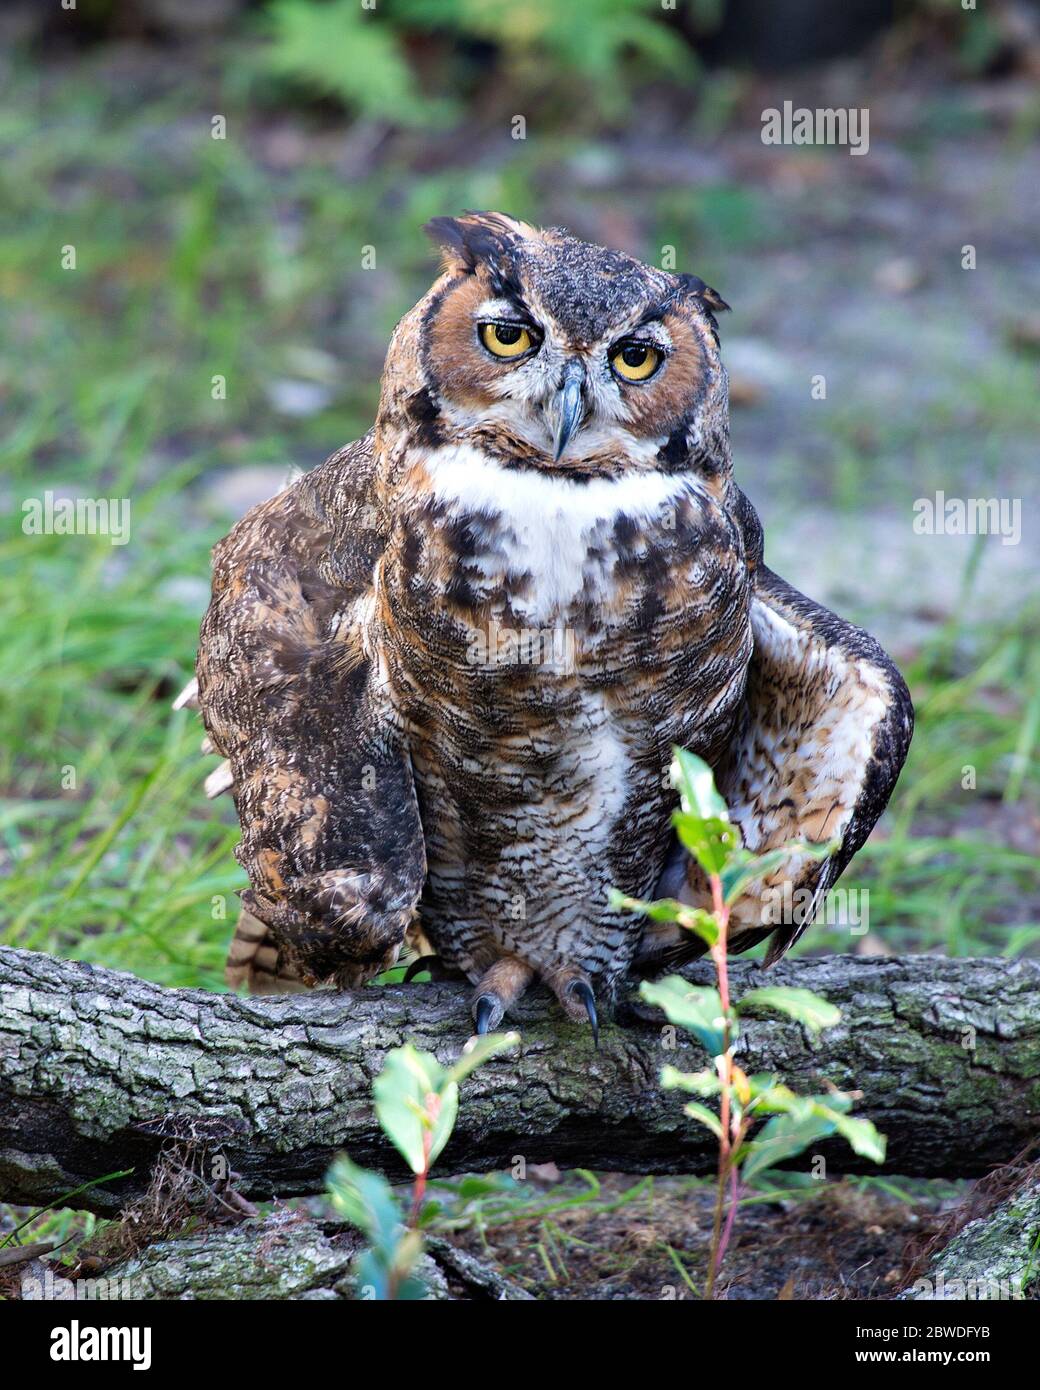 Owl bird perched on a log with bokeh background displaying brown feathers, big eyes, beak, head, feet in its environment and surrounding. Stock Photo